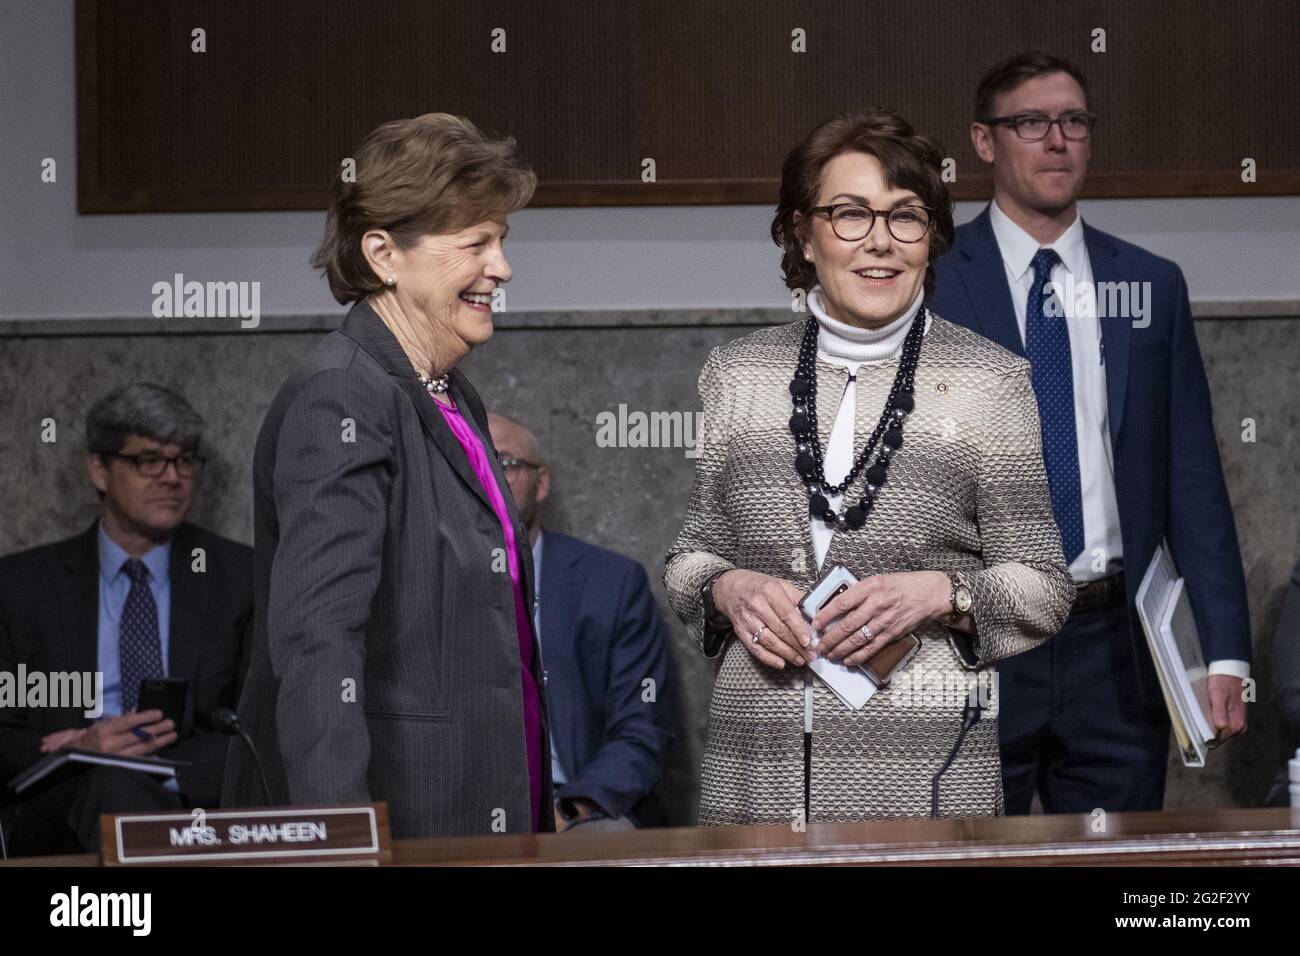 United States Senator Jeanne Shaheen (Democrat of New Hampshire), left, talks with United States Senator Jacky Rosen (Democrat of Nevada), right, during a Senate Committee on Armed Services hearing to examine the Department of Defense budget posture in review of the Defense Authorization Request for fiscal year 2022, in the Dirksen Senate Office Building in Washington, DC, Thursday, June 10, 2021. Photo by Rod Lamkey/CNP/ABACAPRESS.COM Stock Photo